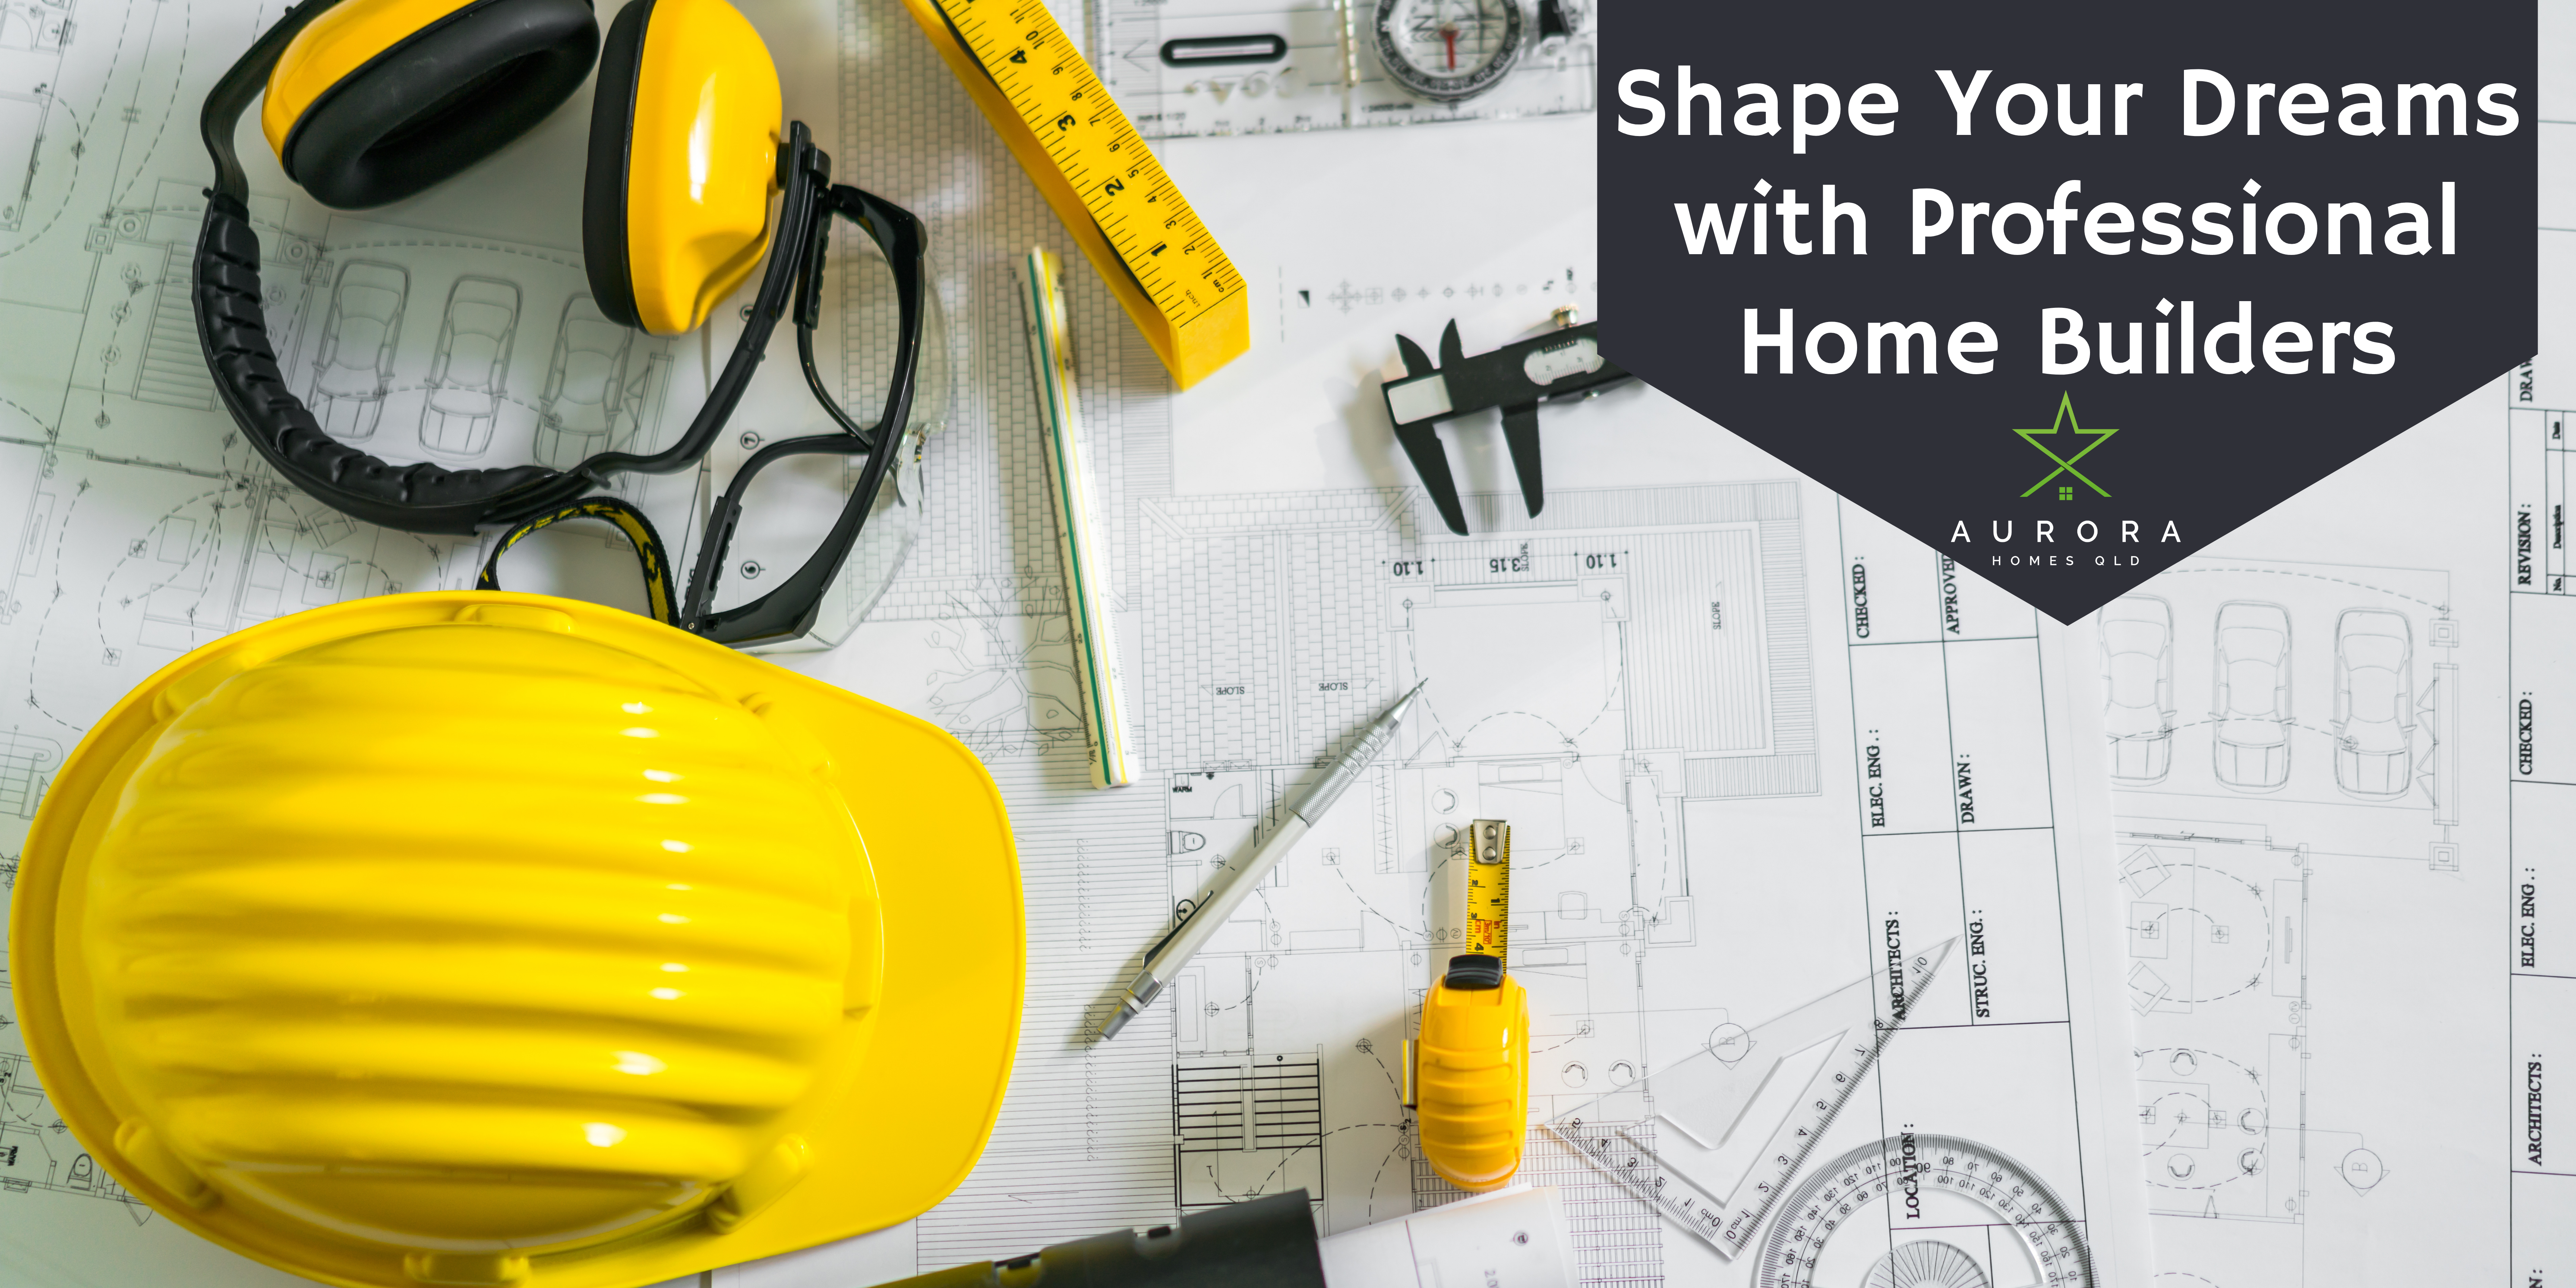 Shape Your Dreams With Professional Home Builders